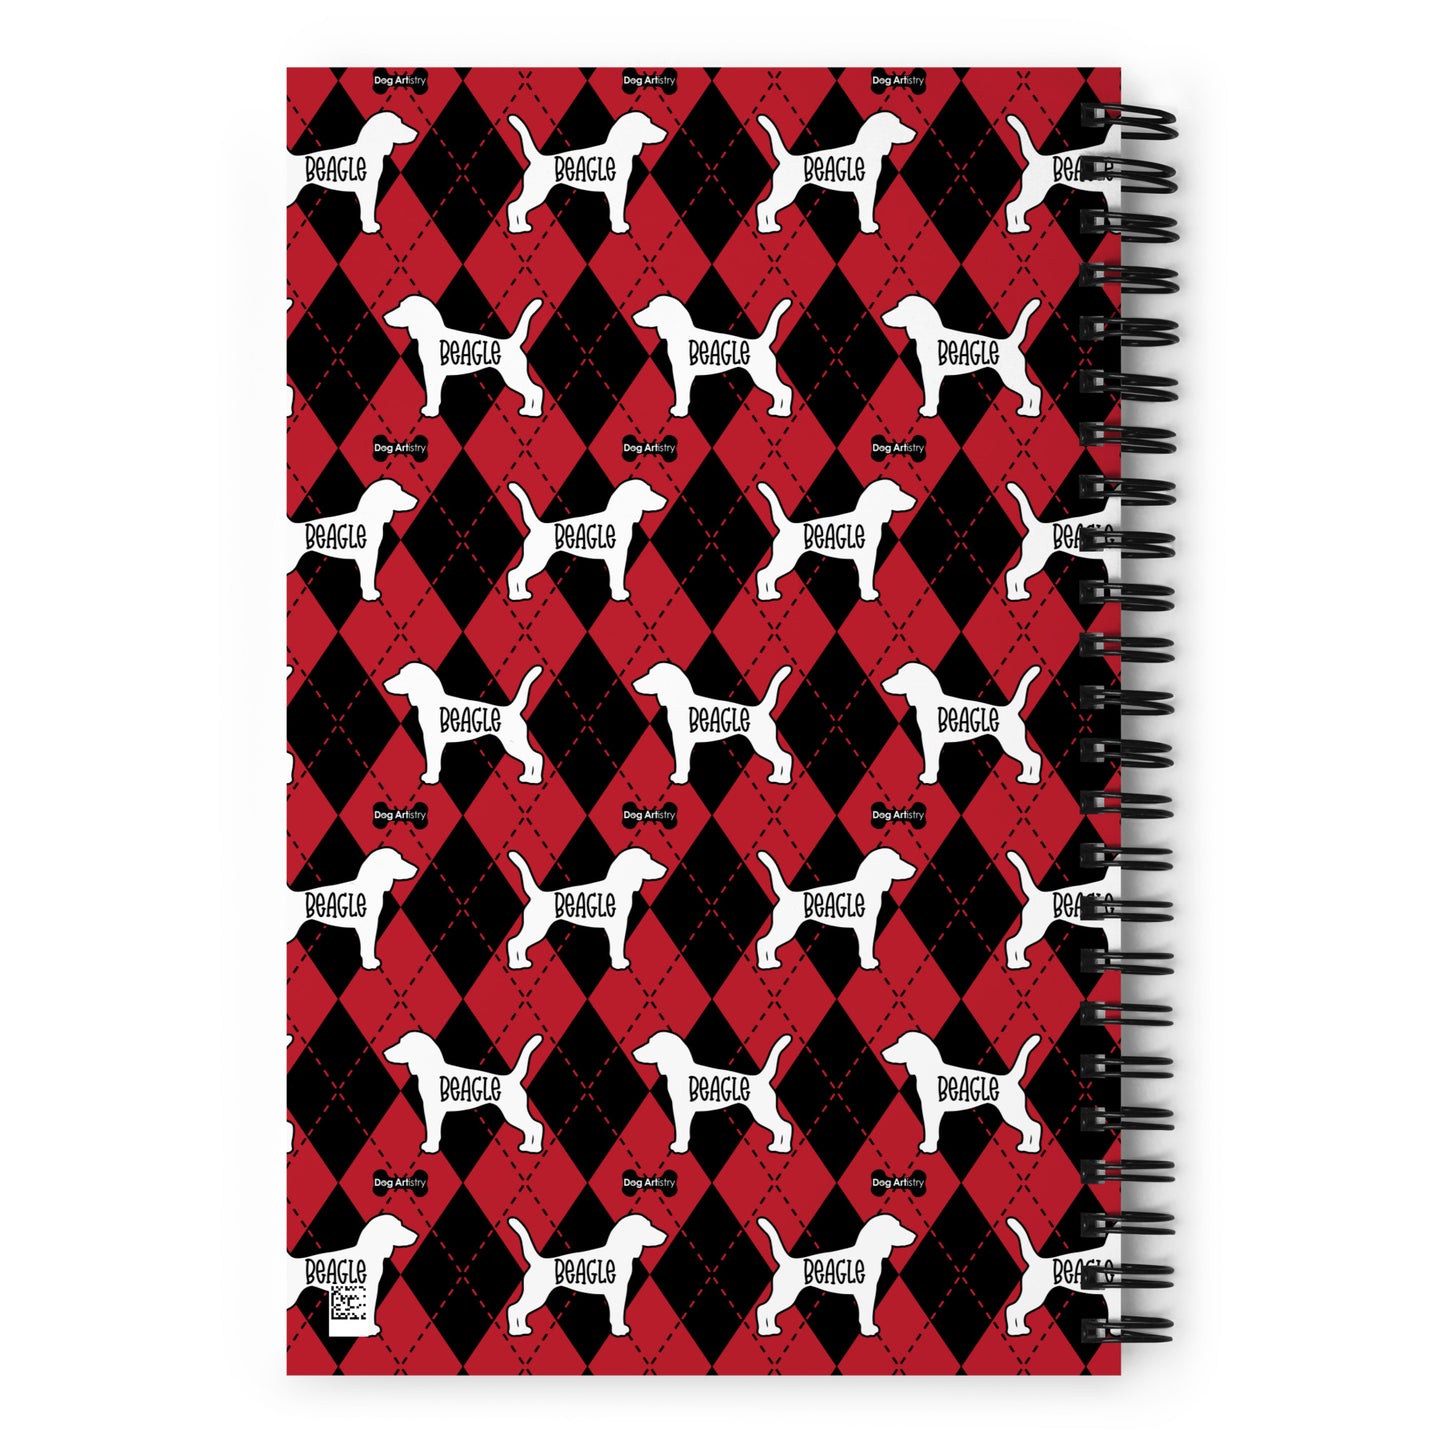 Beagle Argyle Red and Black Spiral Notebooks